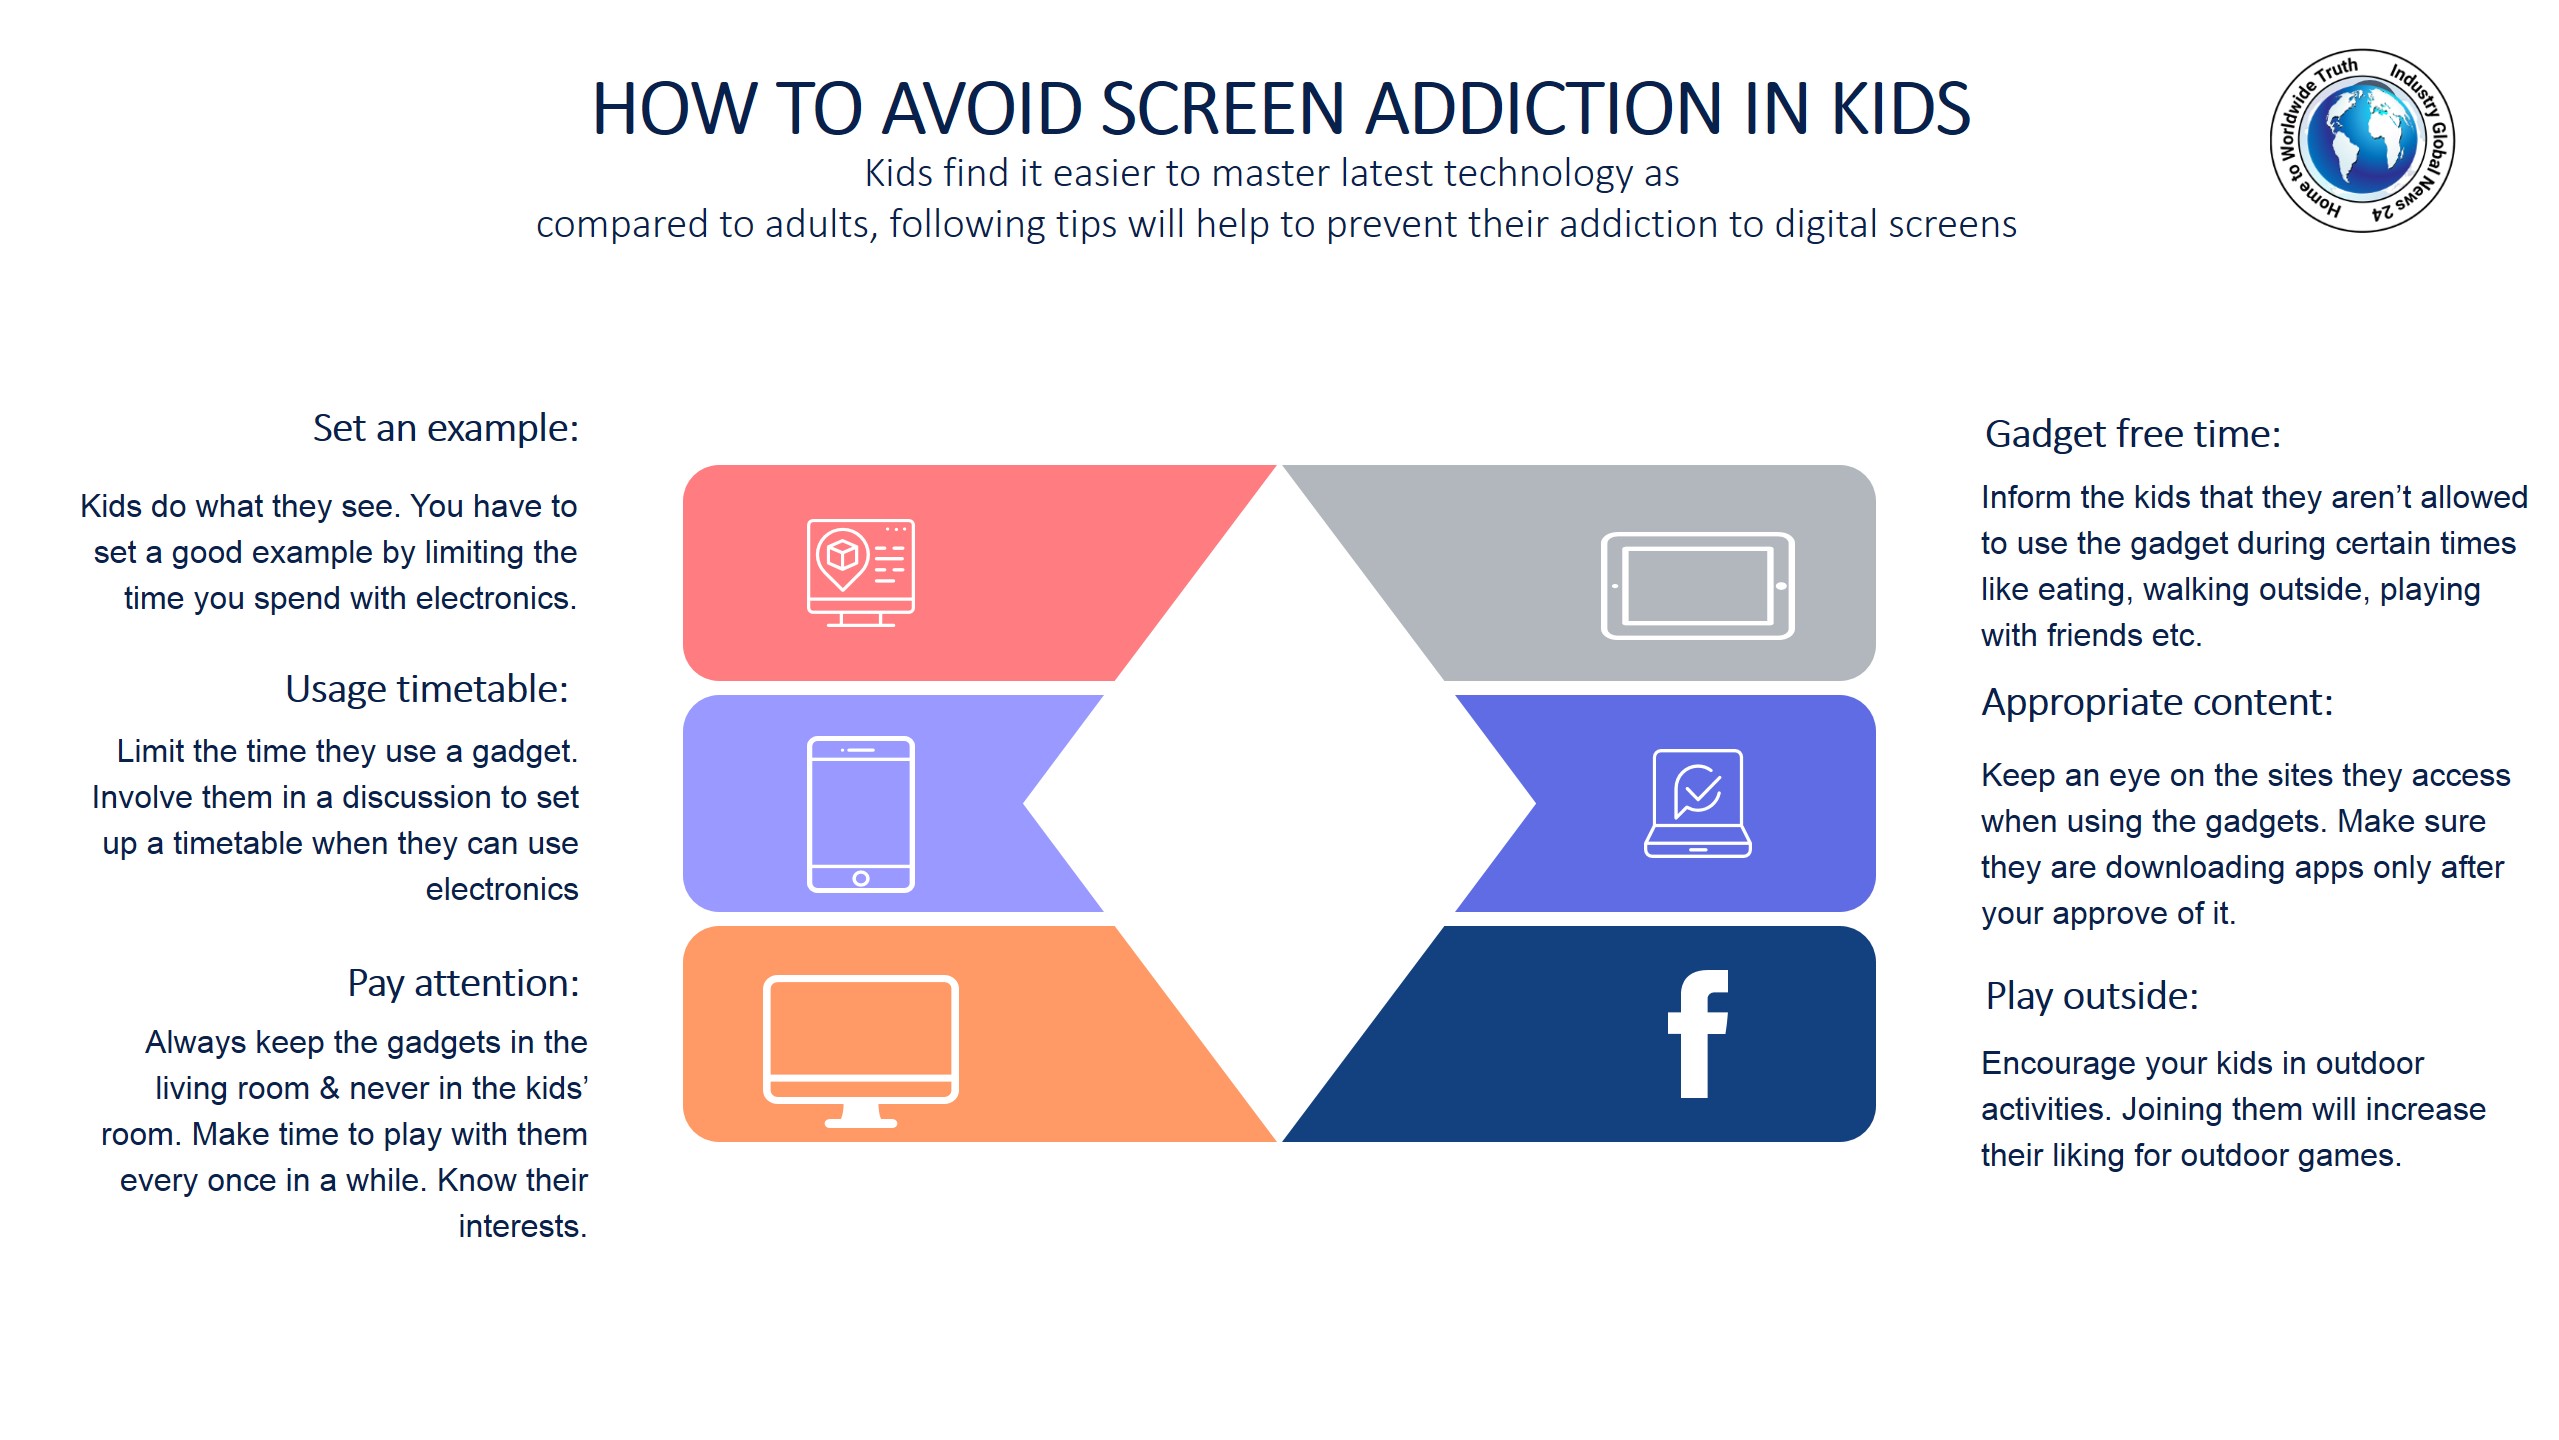 How to avoid screen addiction in kids